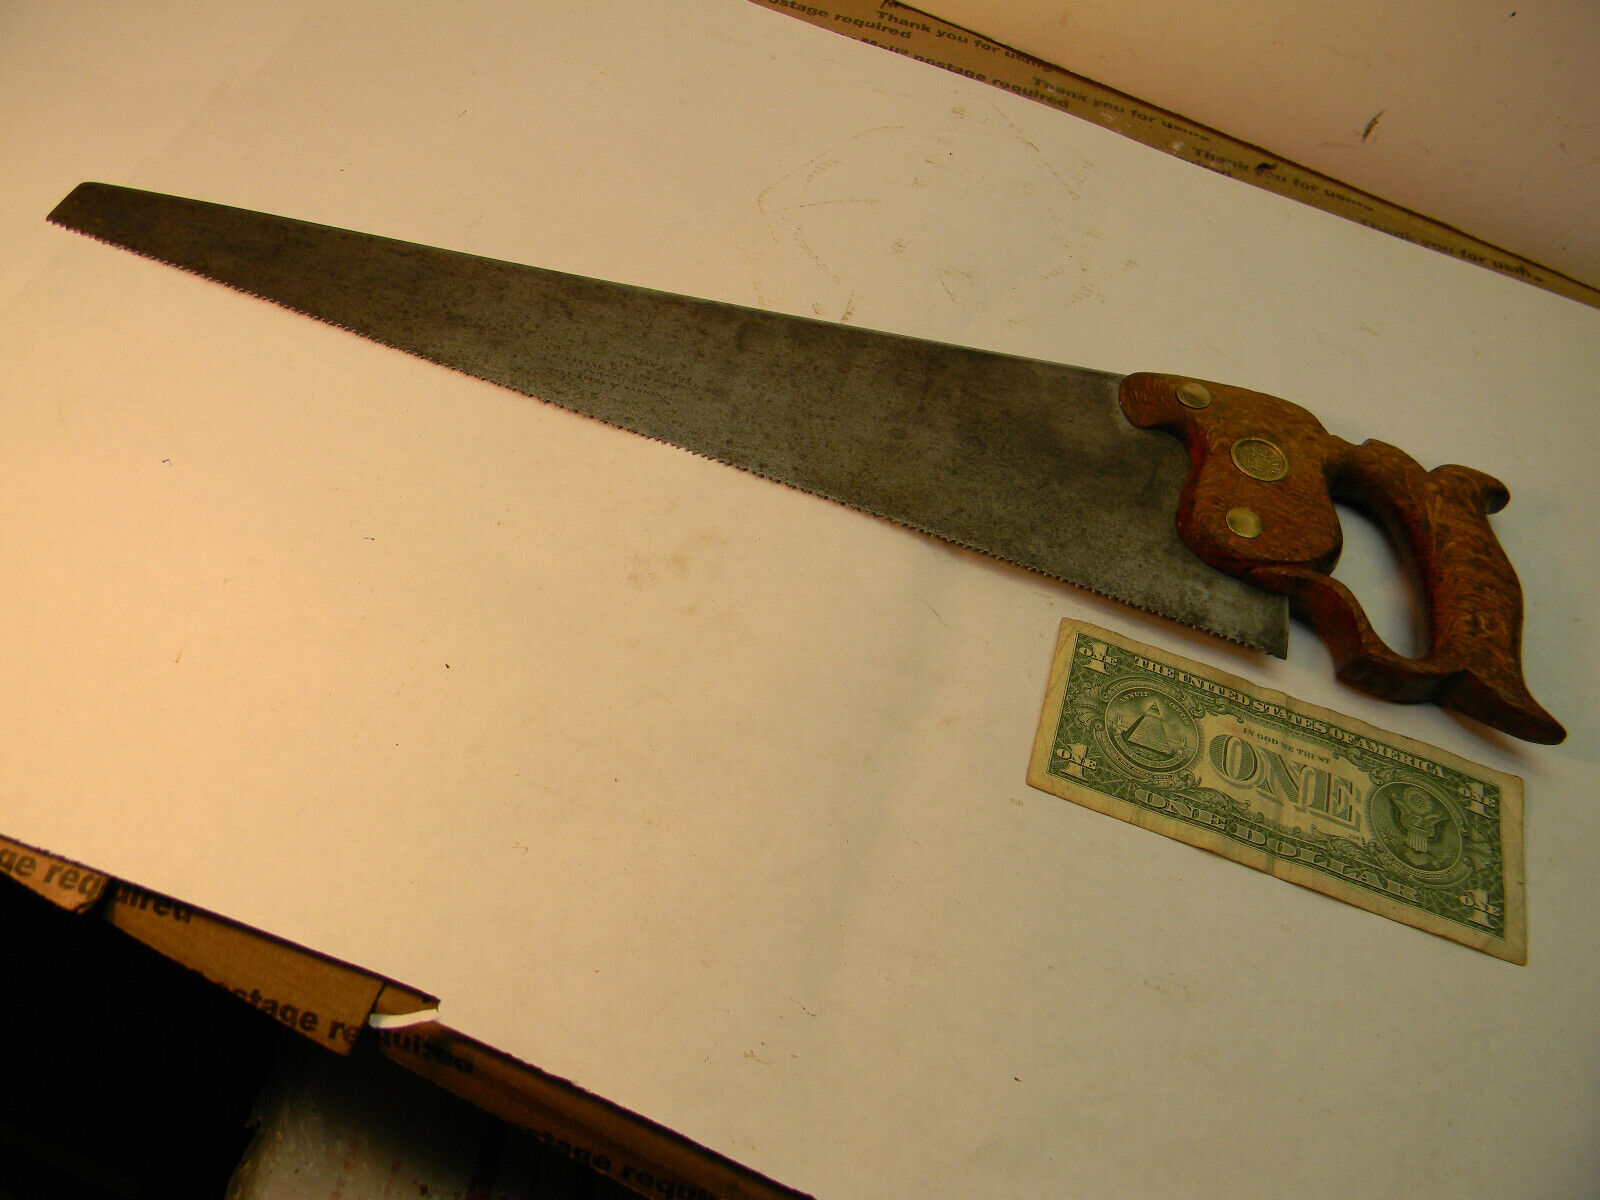 Vintage Disston saw, 1876-1877, 21 in. long, 9 tpi, classic carpentry